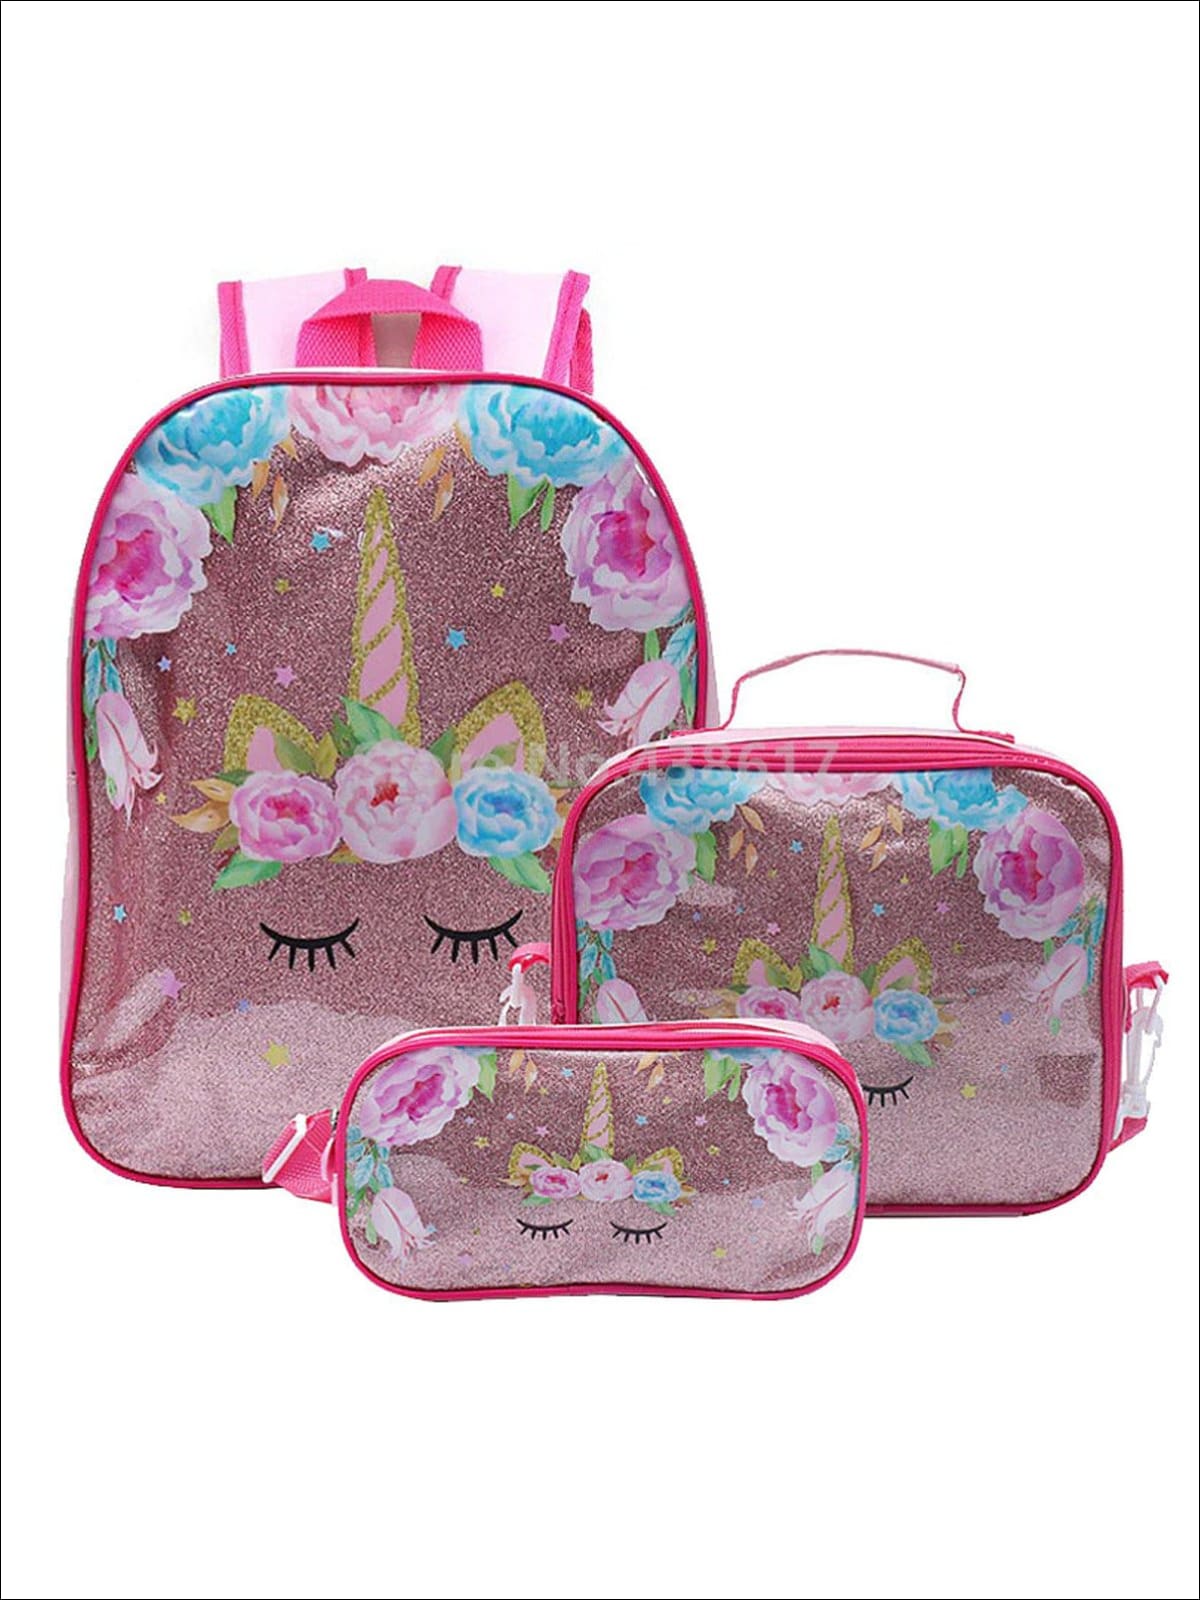 Girl's Backpack, Rainbow Gradient Schoolbag Starry Sky Unicorn Bookbag with  Lunch Pack Pencil Case 3-Piece Set (E) 